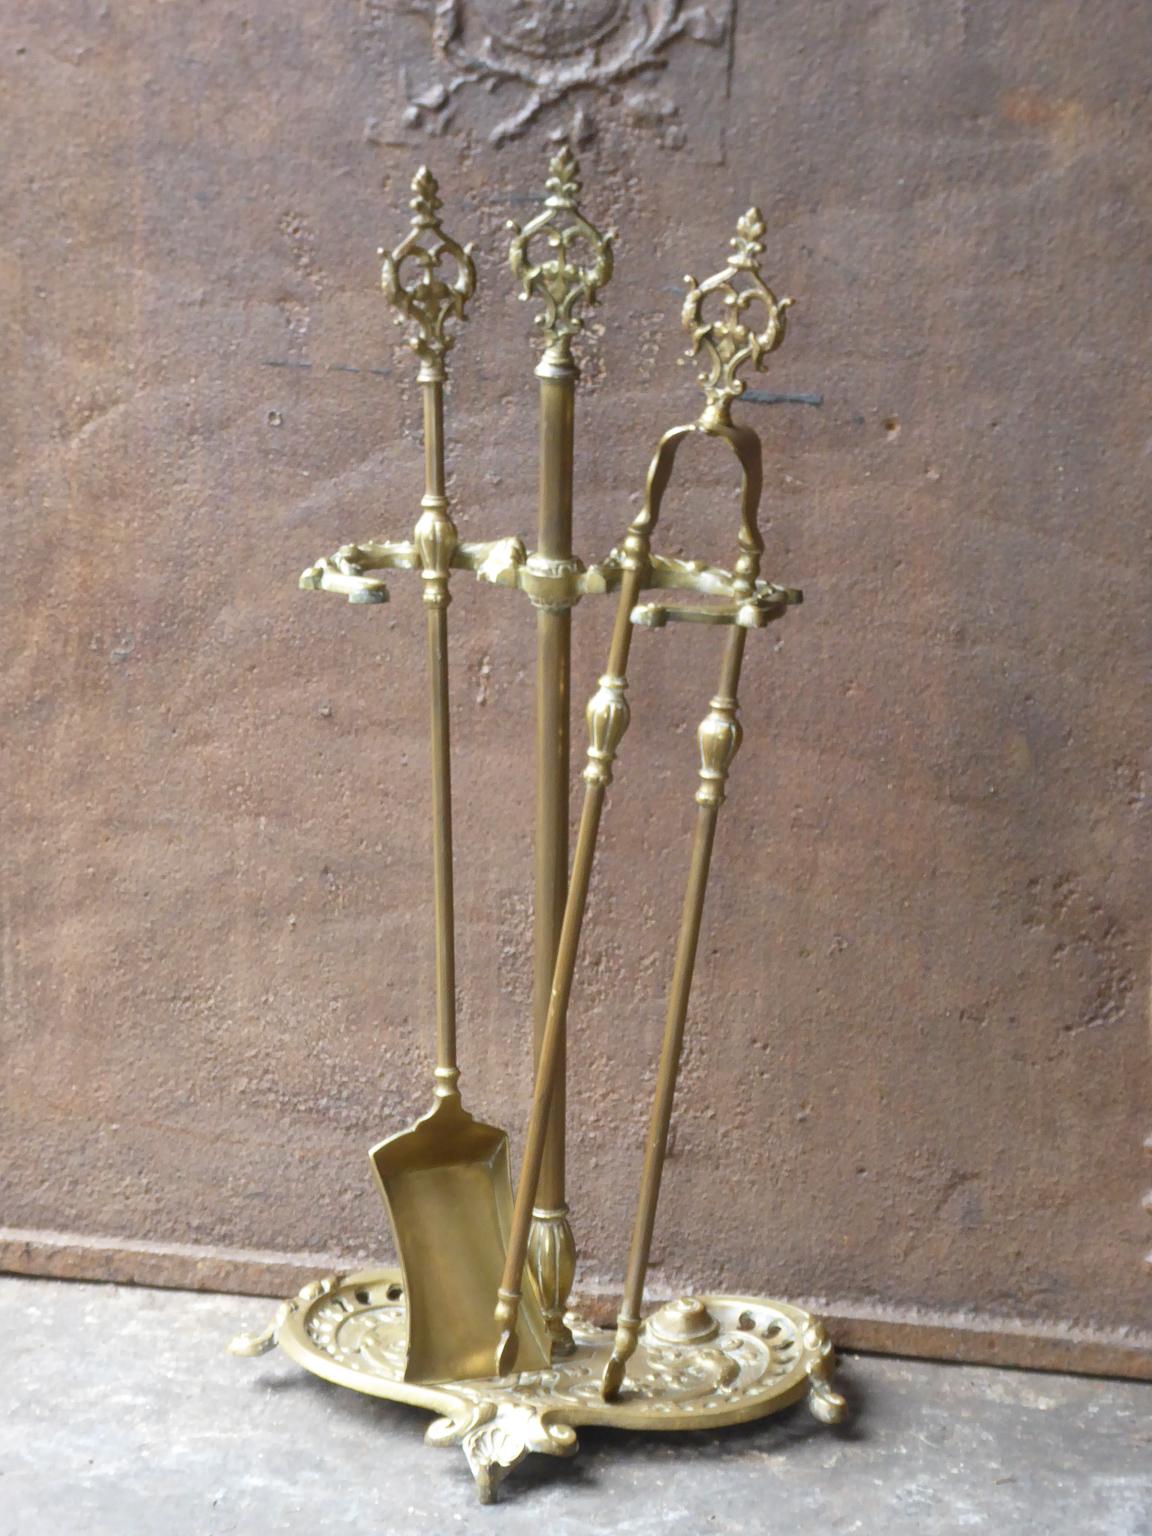 19th-20th century French Napoleon III fireplace tool set. The fire irons consist of a stand and two fireplace tools. They are made of brass. The fire tools are in a good condition and are fully functional.








 